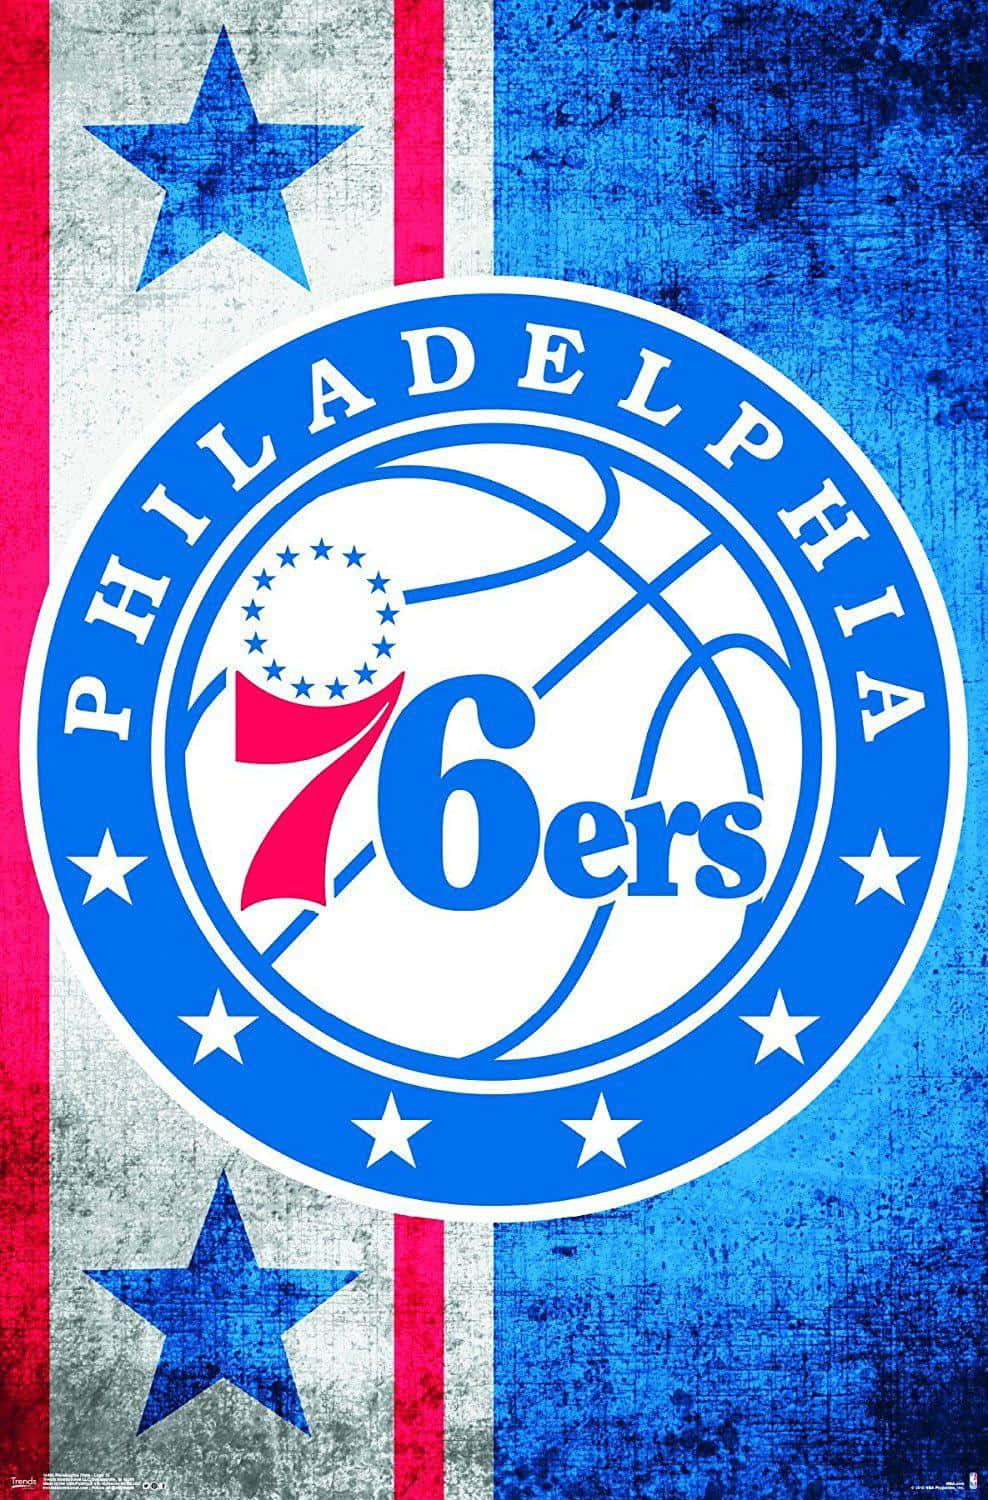 Upgrade your team spirit with the Official76ers NBA Iphone Case Wallpaper